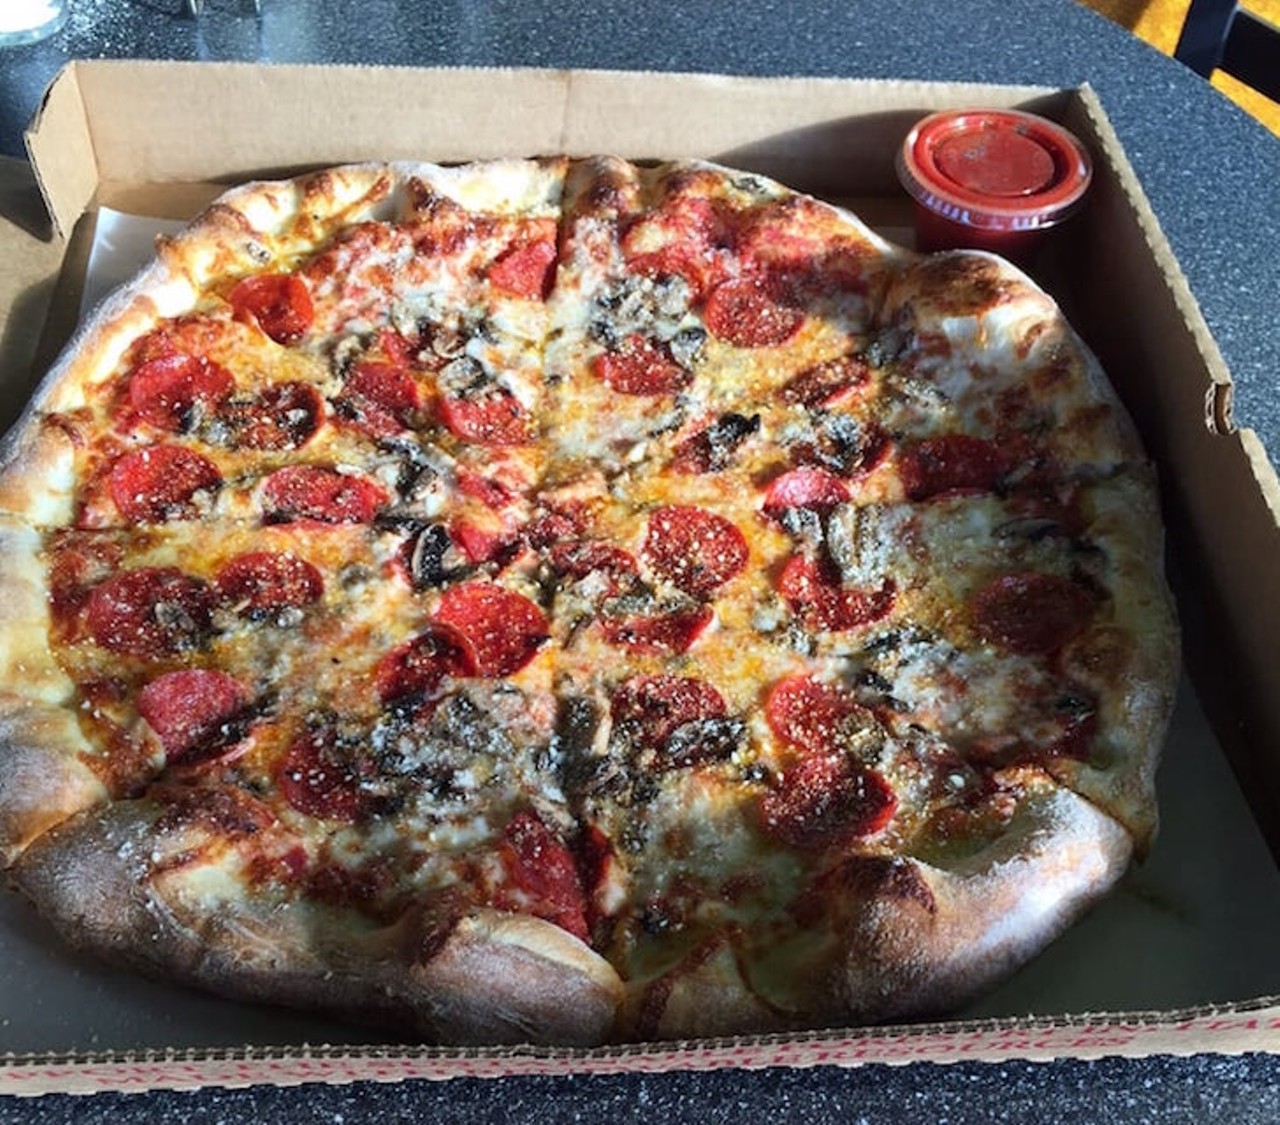 Mama Mia&#146;s Pizzeria
706 E. Wallace St., Orlando (407) 851-6001
Mama Mia&#146;s continues its reign in Orlando, serving up hand-crafted pizzas to Orlandoans for more than two decades. All of their sauces are homemade, making this spot a genuine pick for fresh goods.
Photo via Joni D./Yelp